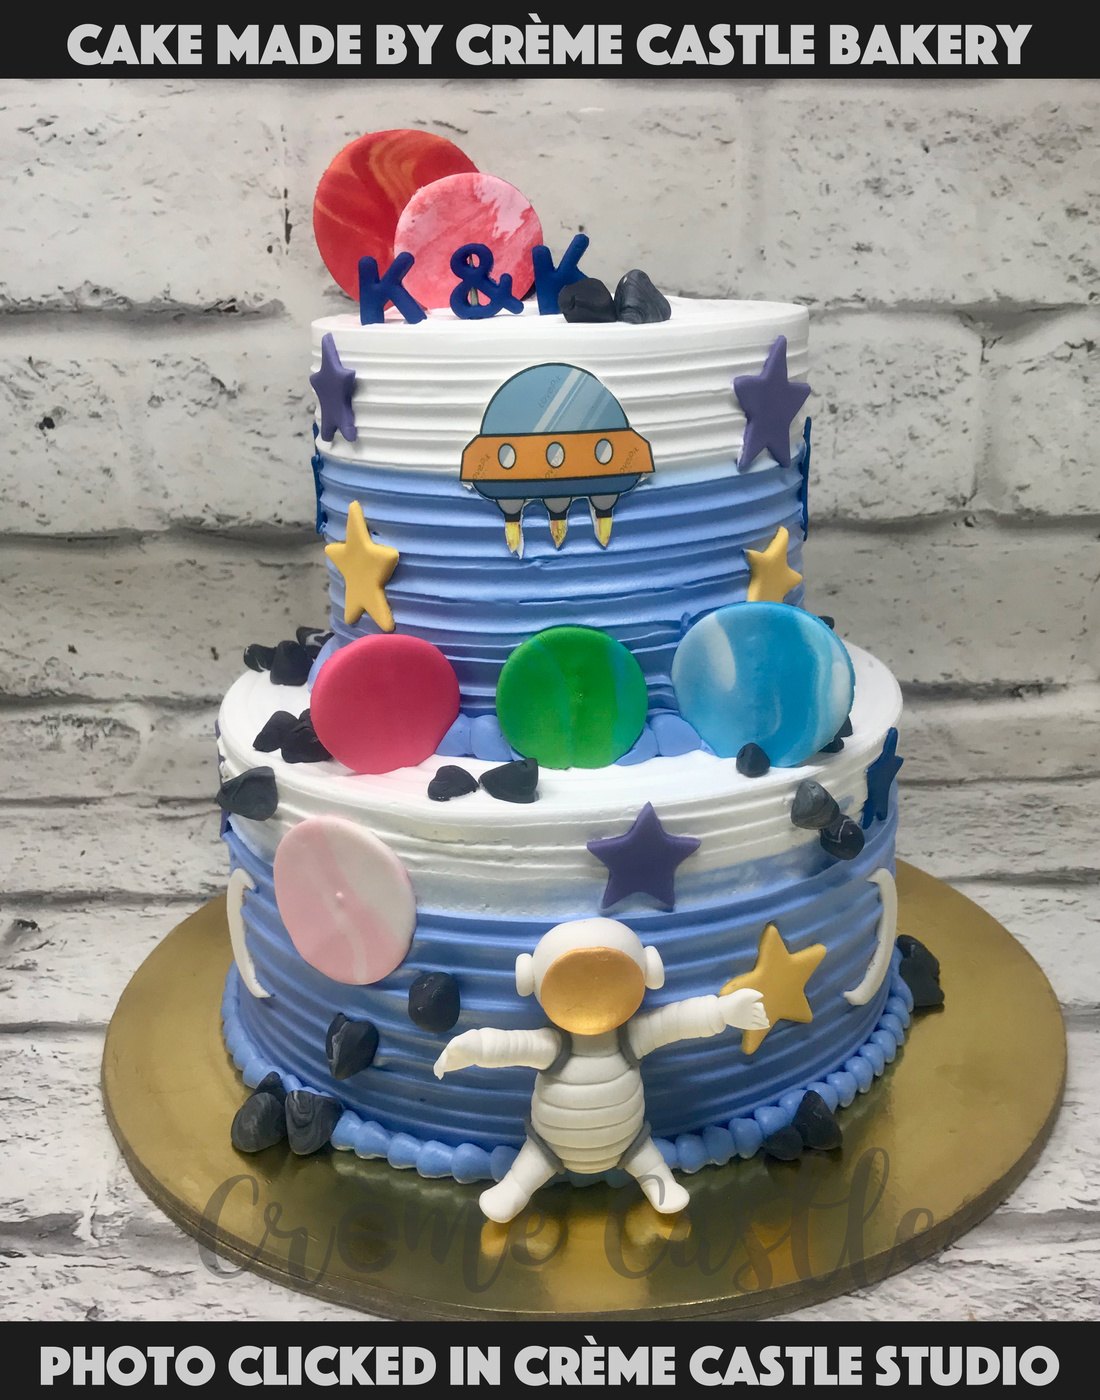 Space theme Cake with Astronaut by Creme Castle